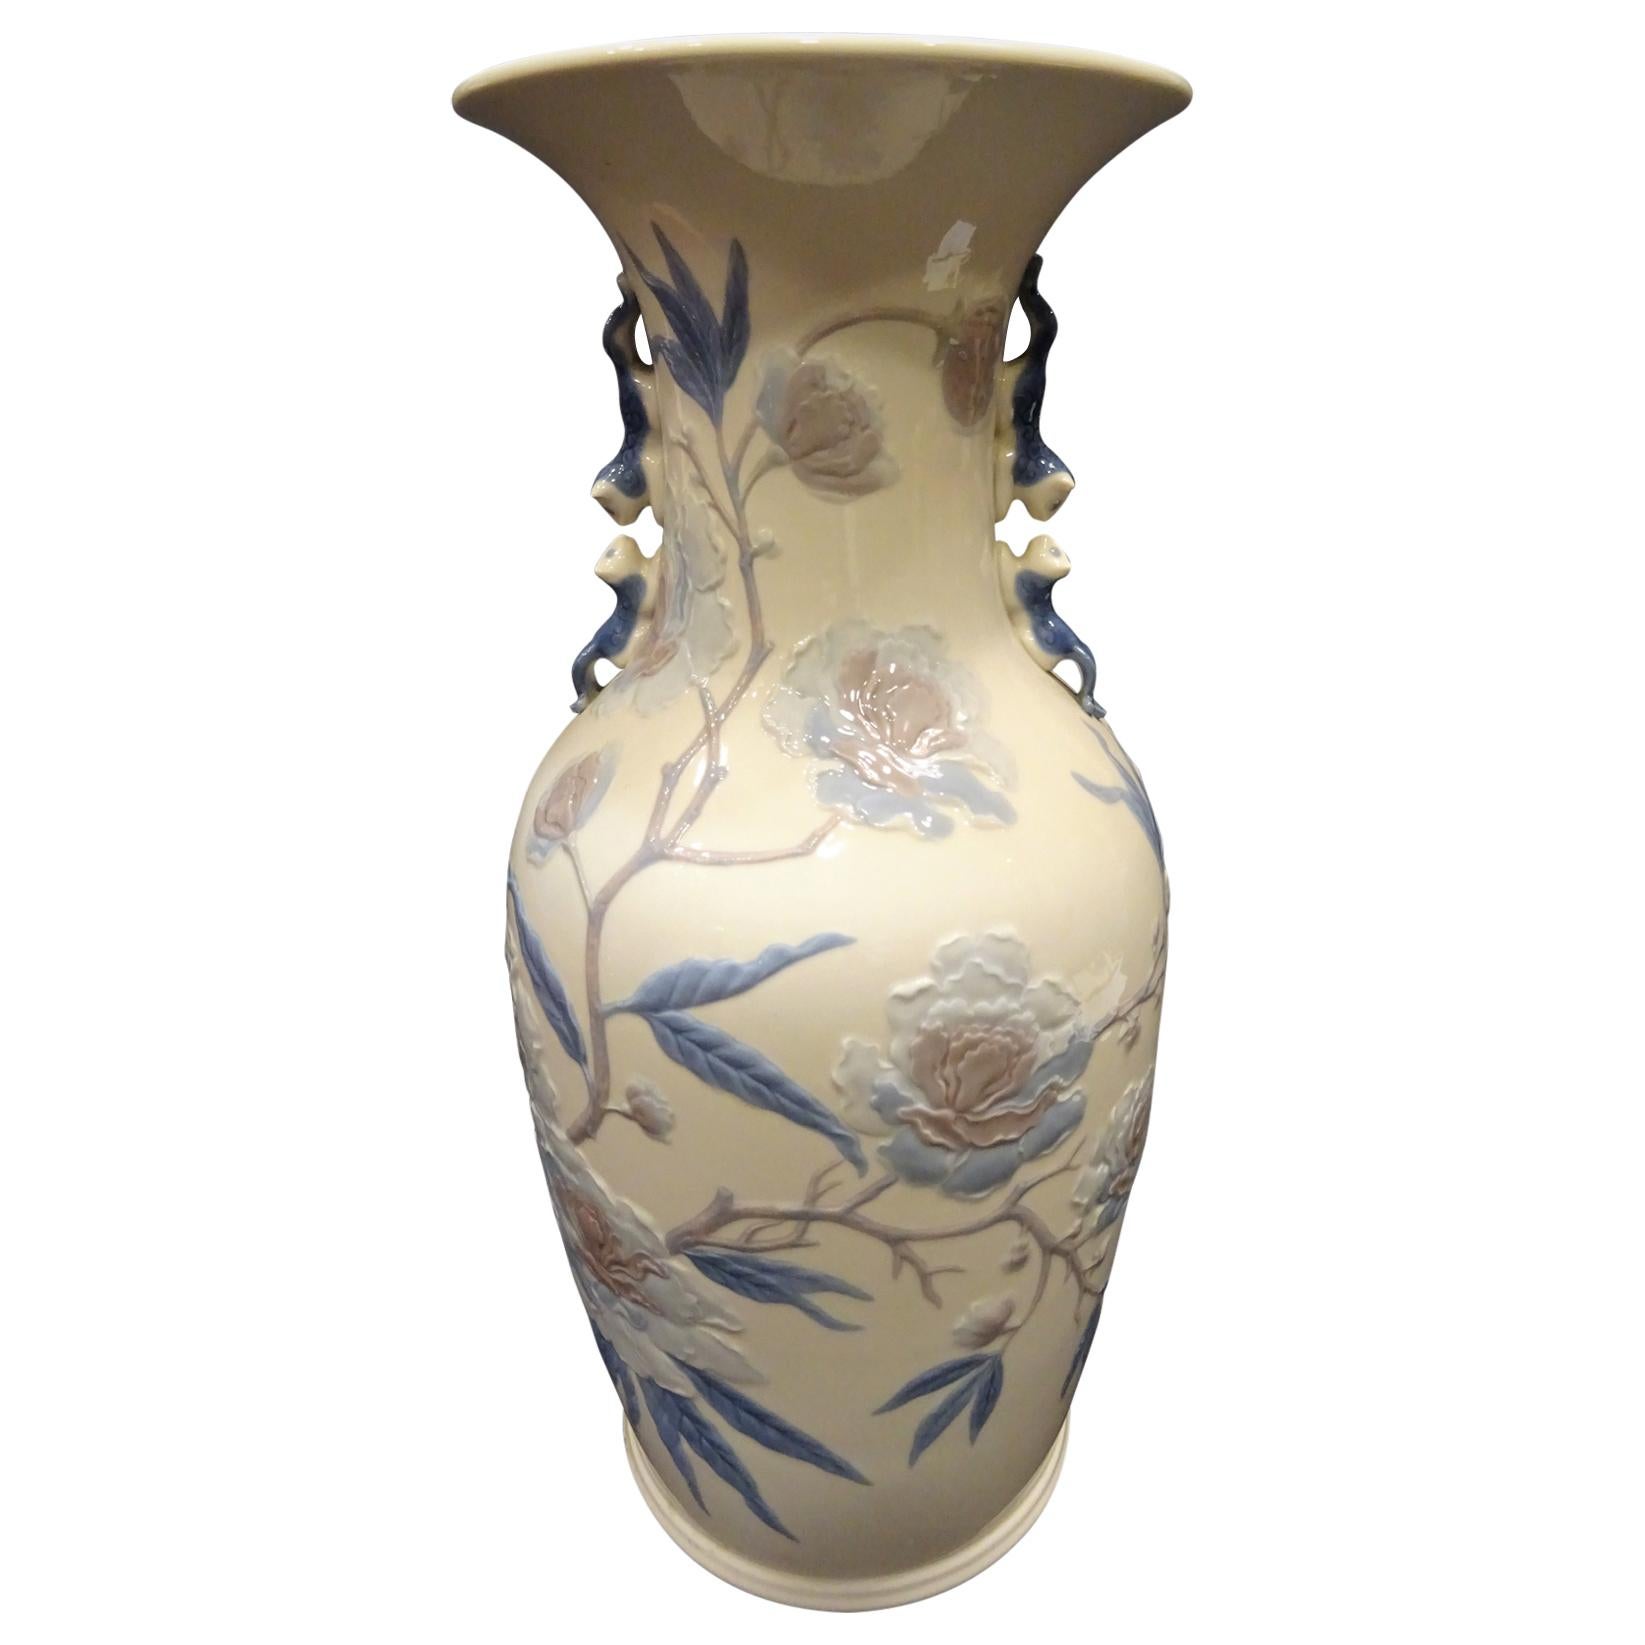 Midcentury Blue and White Lladro Spanish Porcelain Vase in Oriental Style